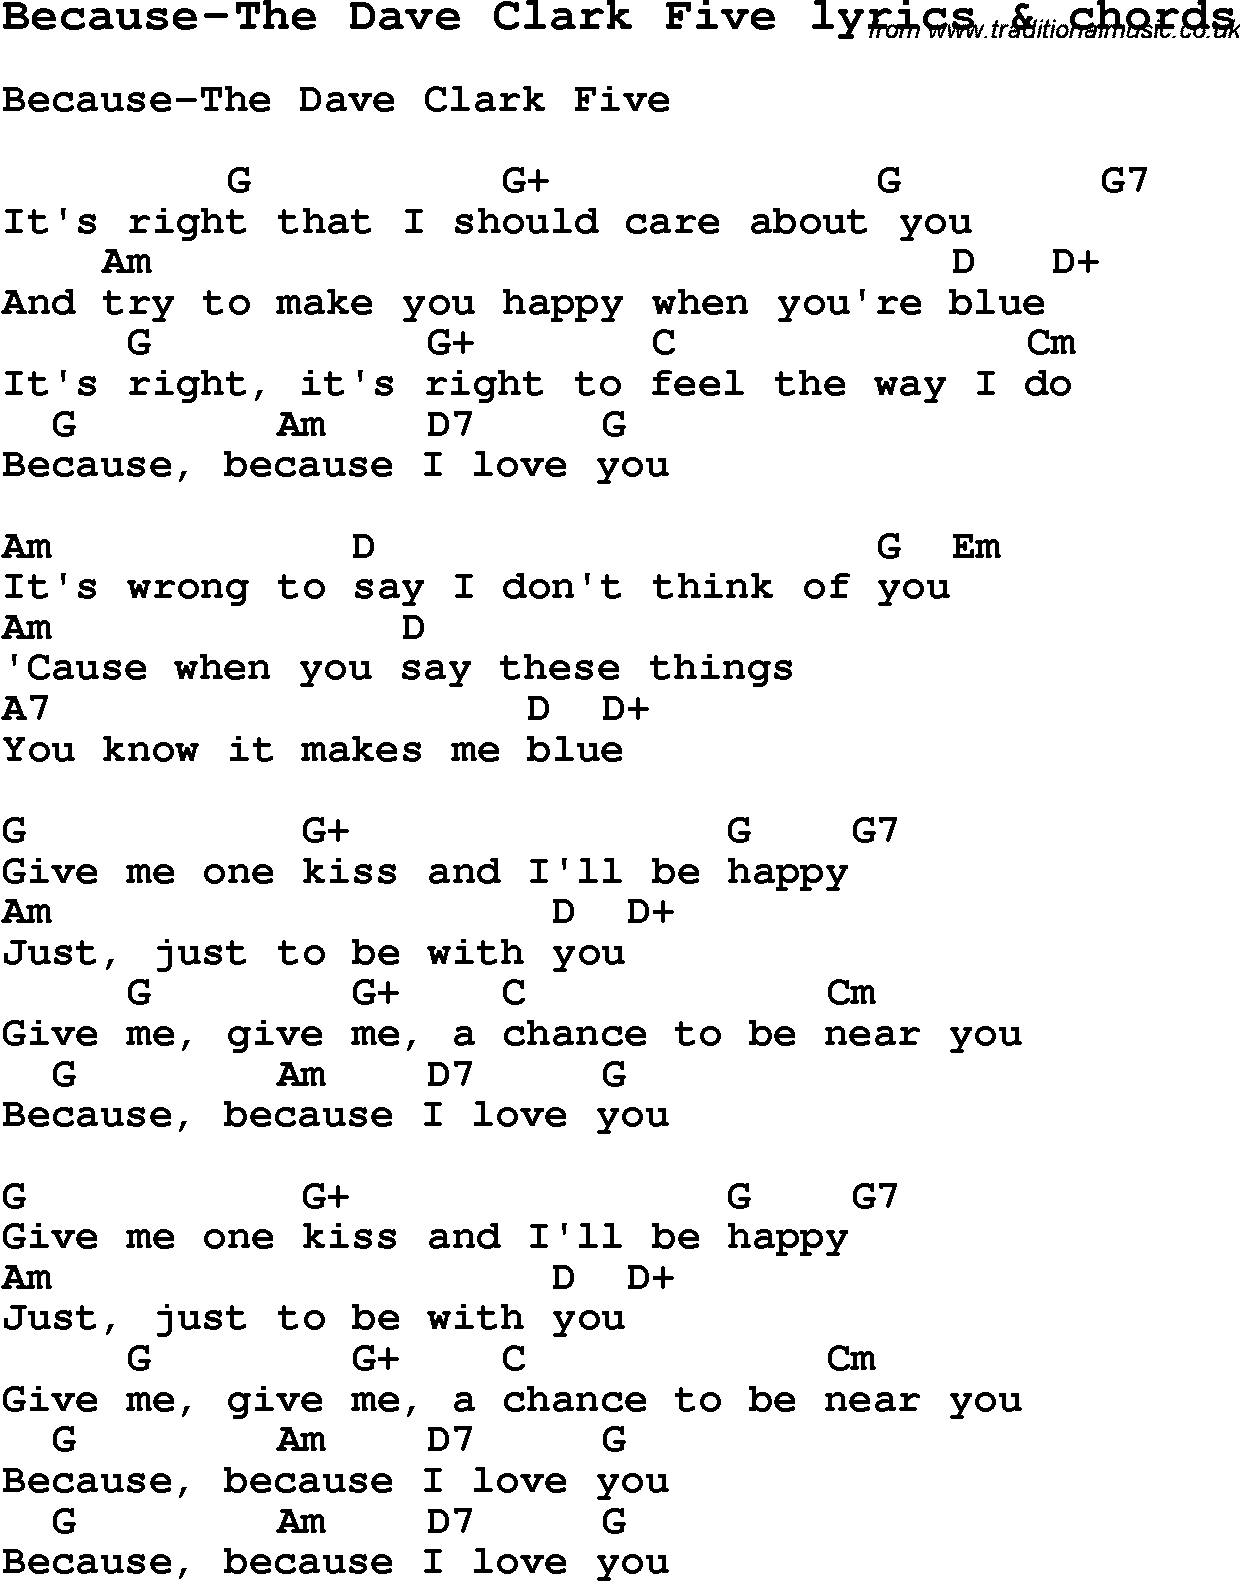 Love Song Lyrics for: Because-The Dave Clark Five with chords for Ukulele, Guitar Banjo etc.